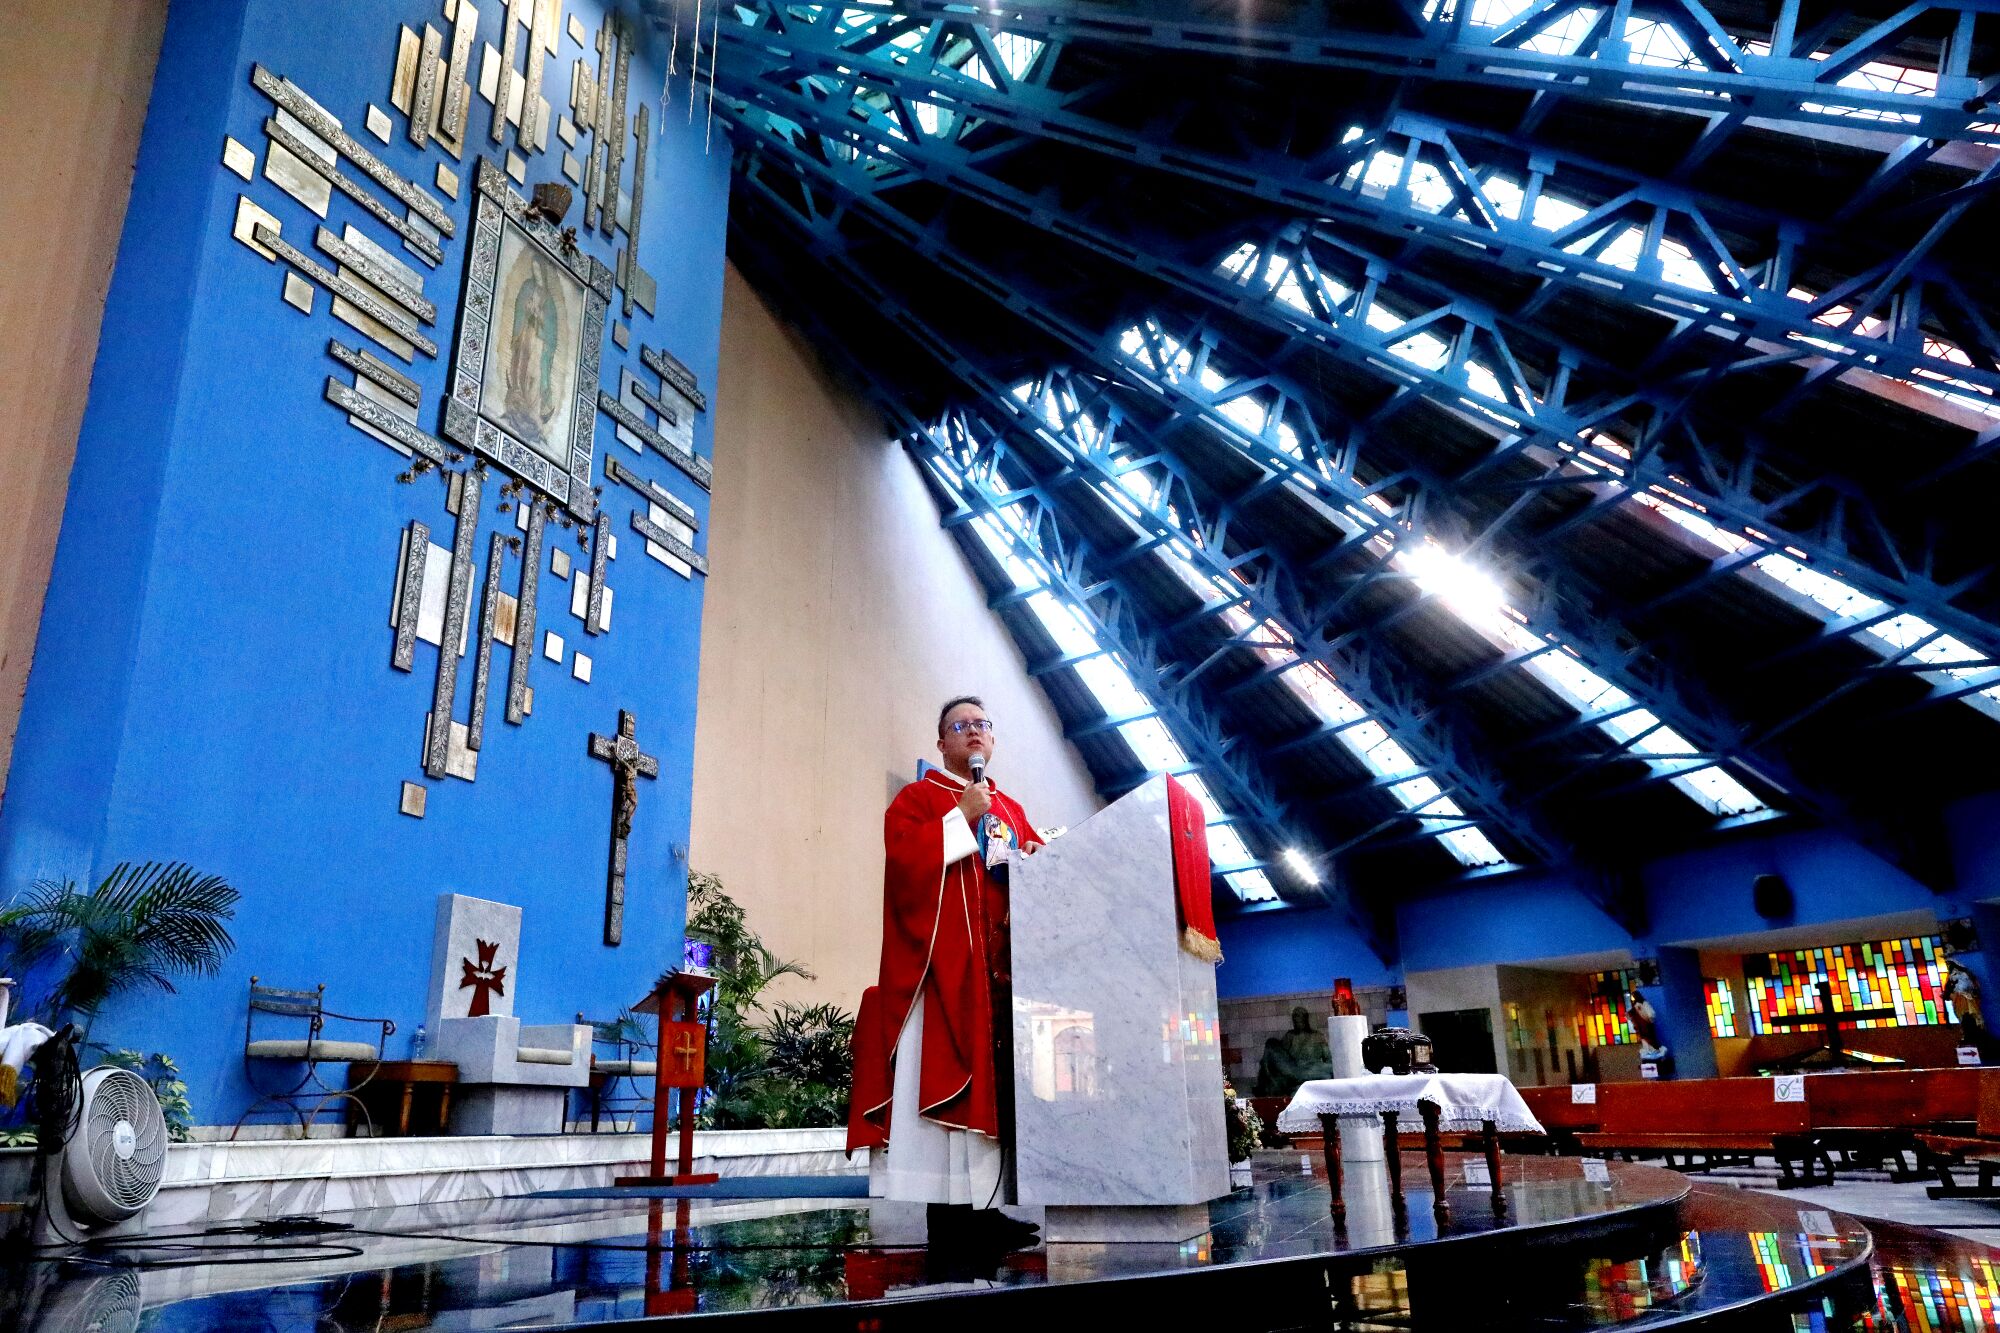 A priest speaks into a microphone in a largely empty church